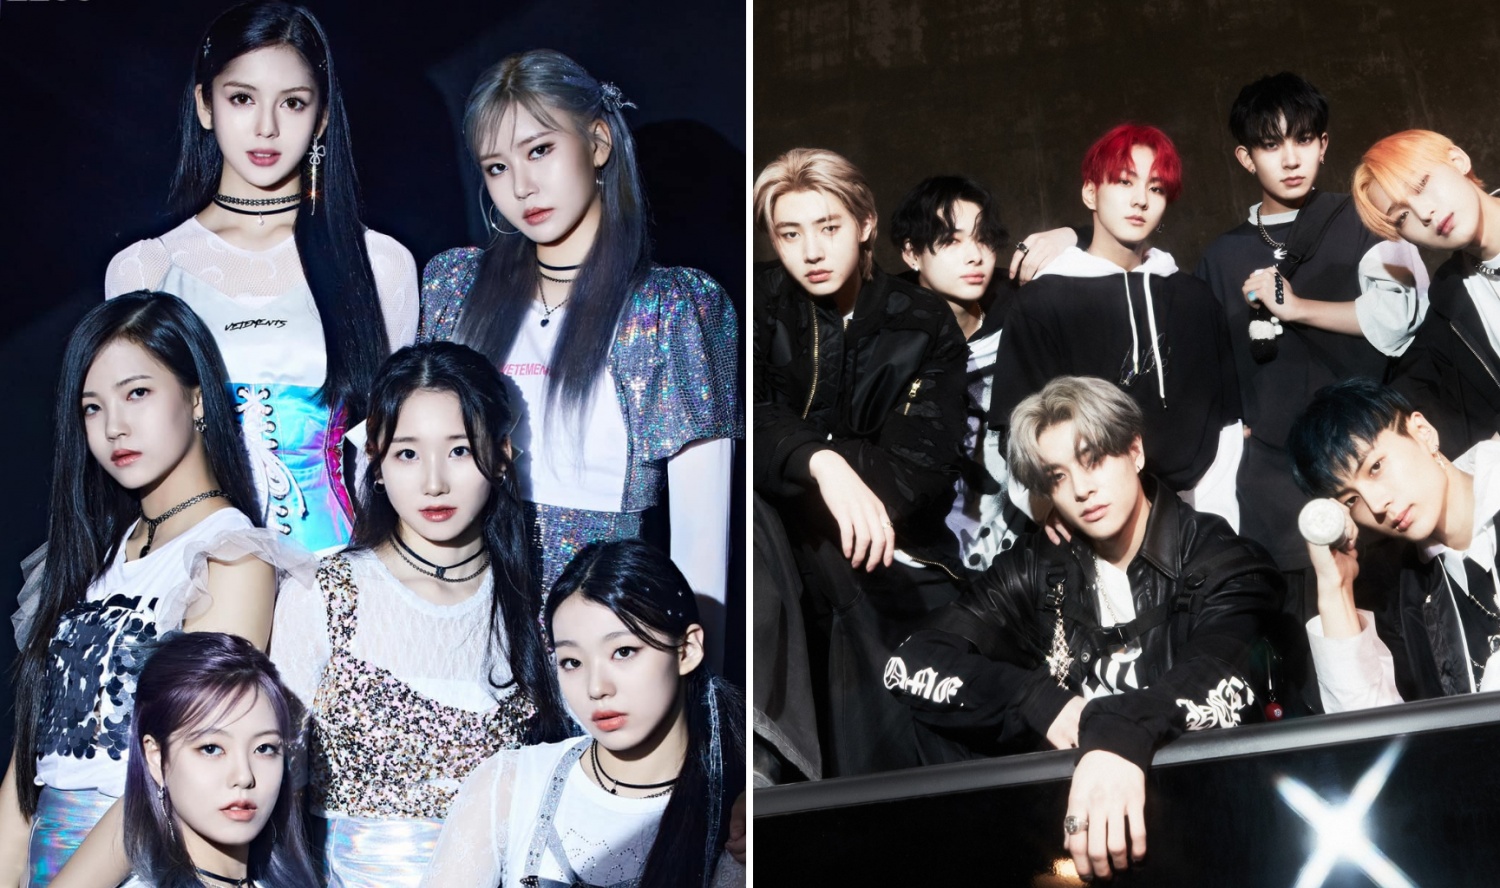 5 K-pop groups that are extremely popular in some countries